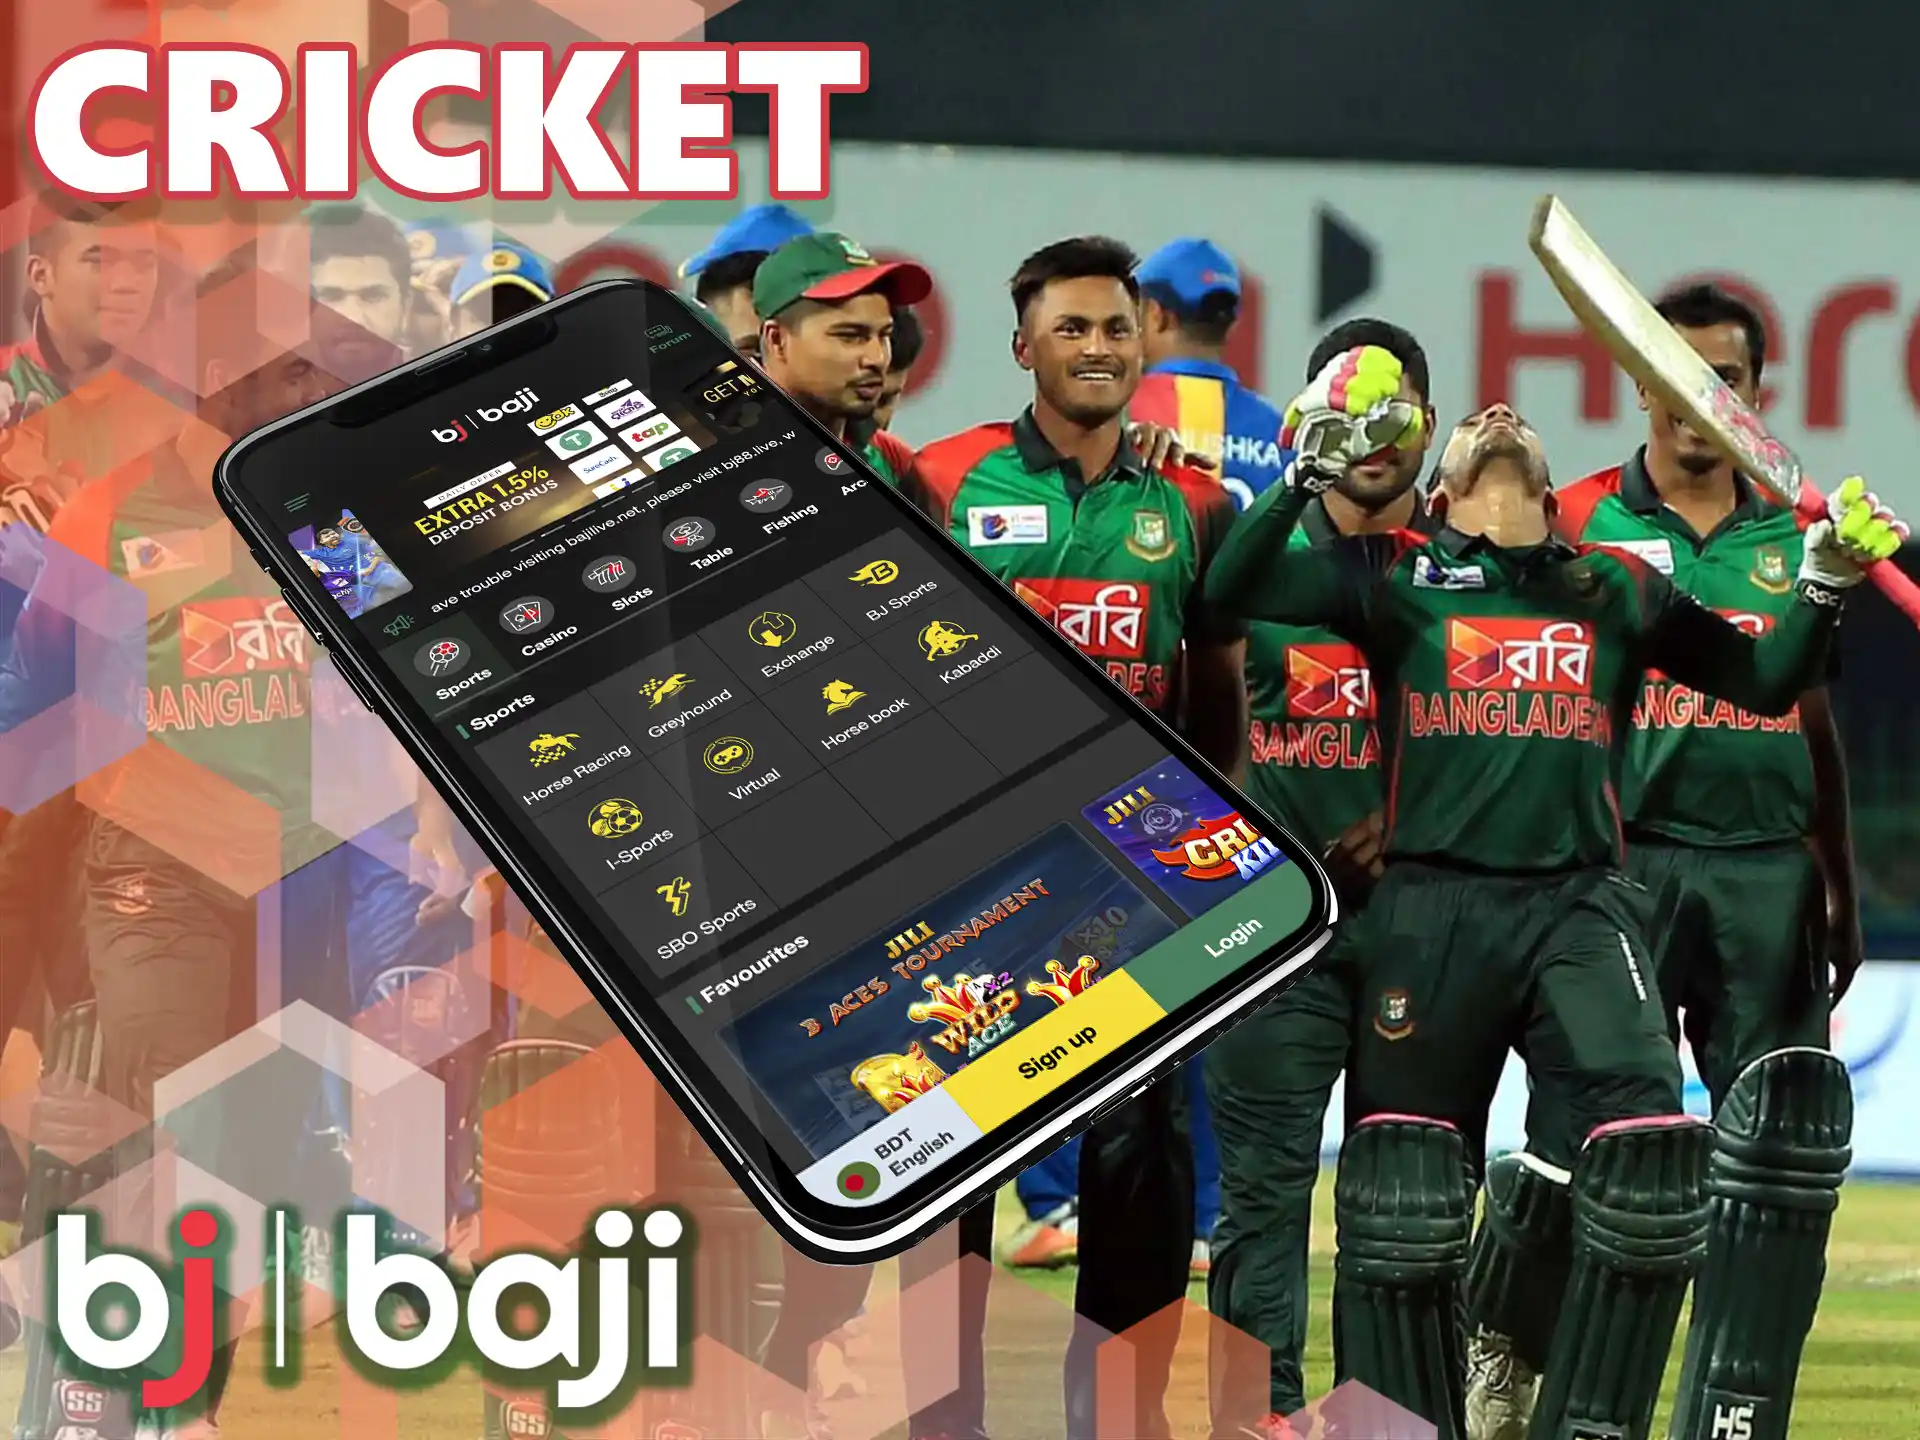 Fans of the sport will find a lot of interesting things in the Baji mobile app, only major competitions are waiting for you.